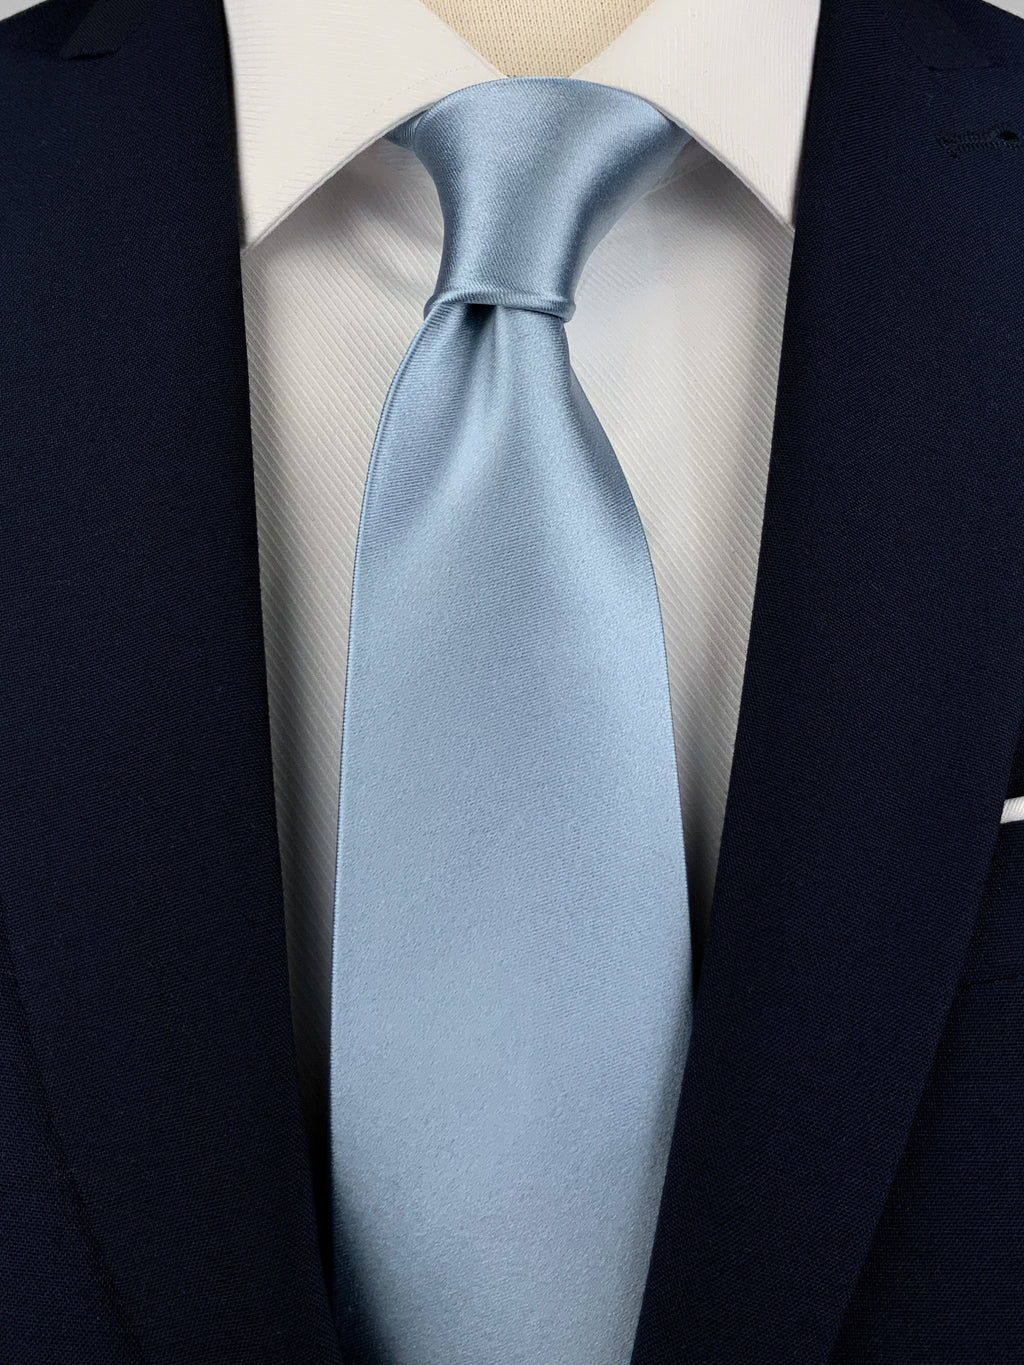 Ice blue mulberry silk satin tie on a white shirt and a navy blue suit